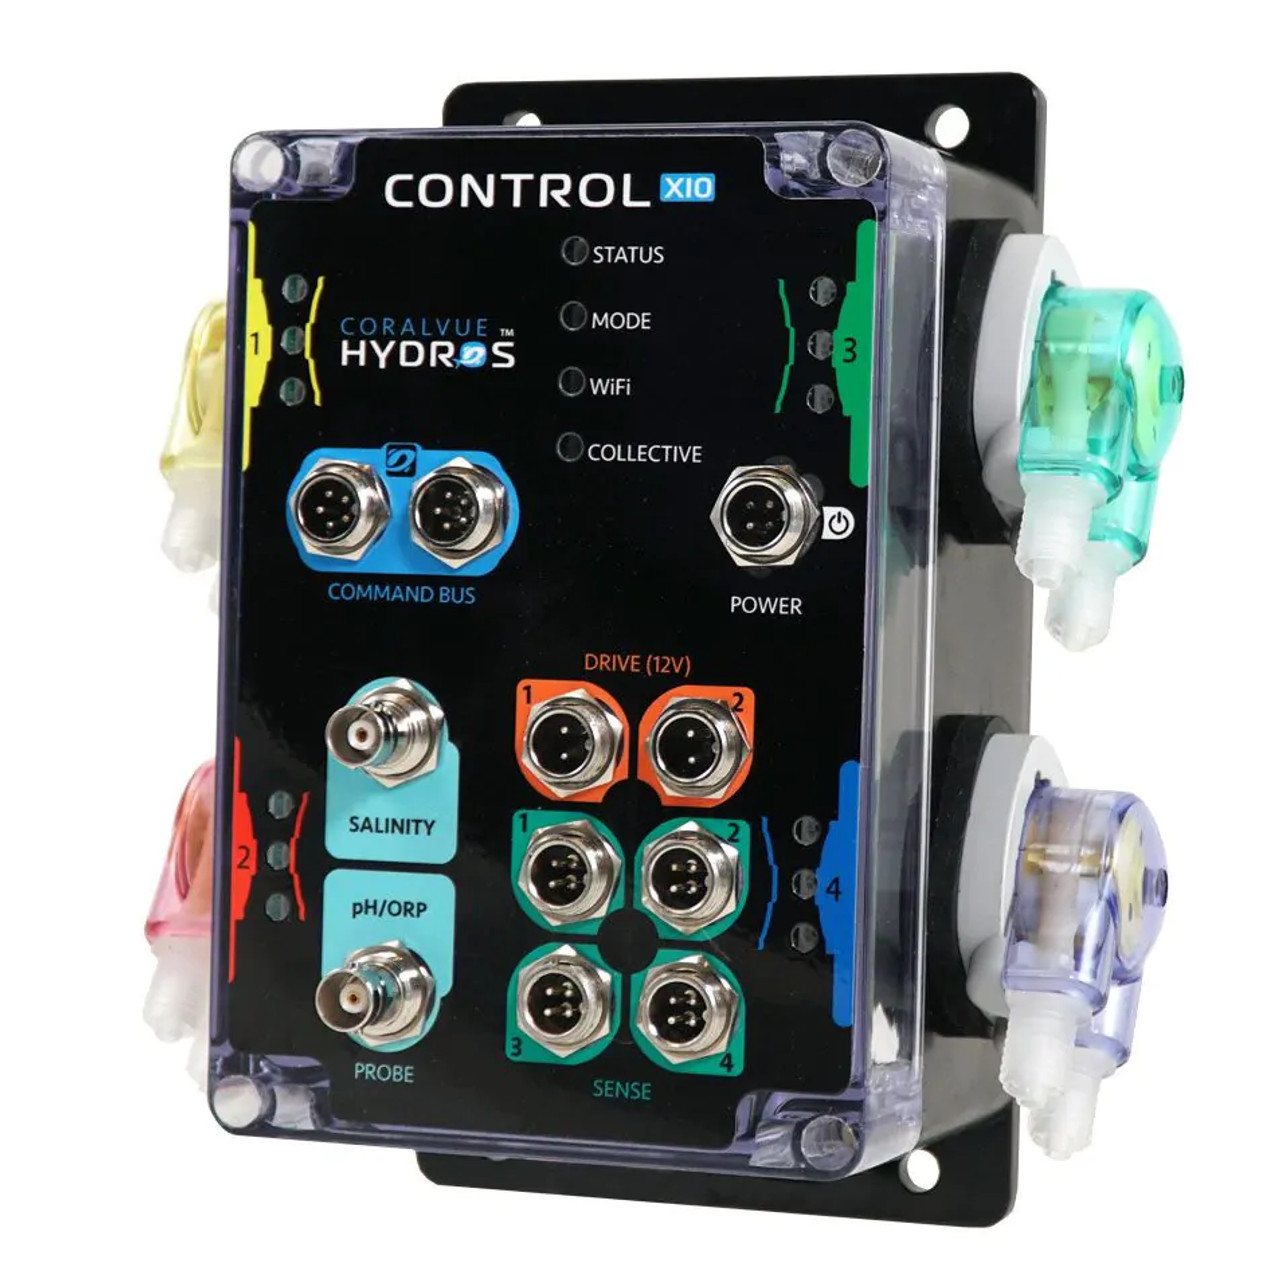 X10 Controller Kit  Includes Mini Timer Controller, Wireless